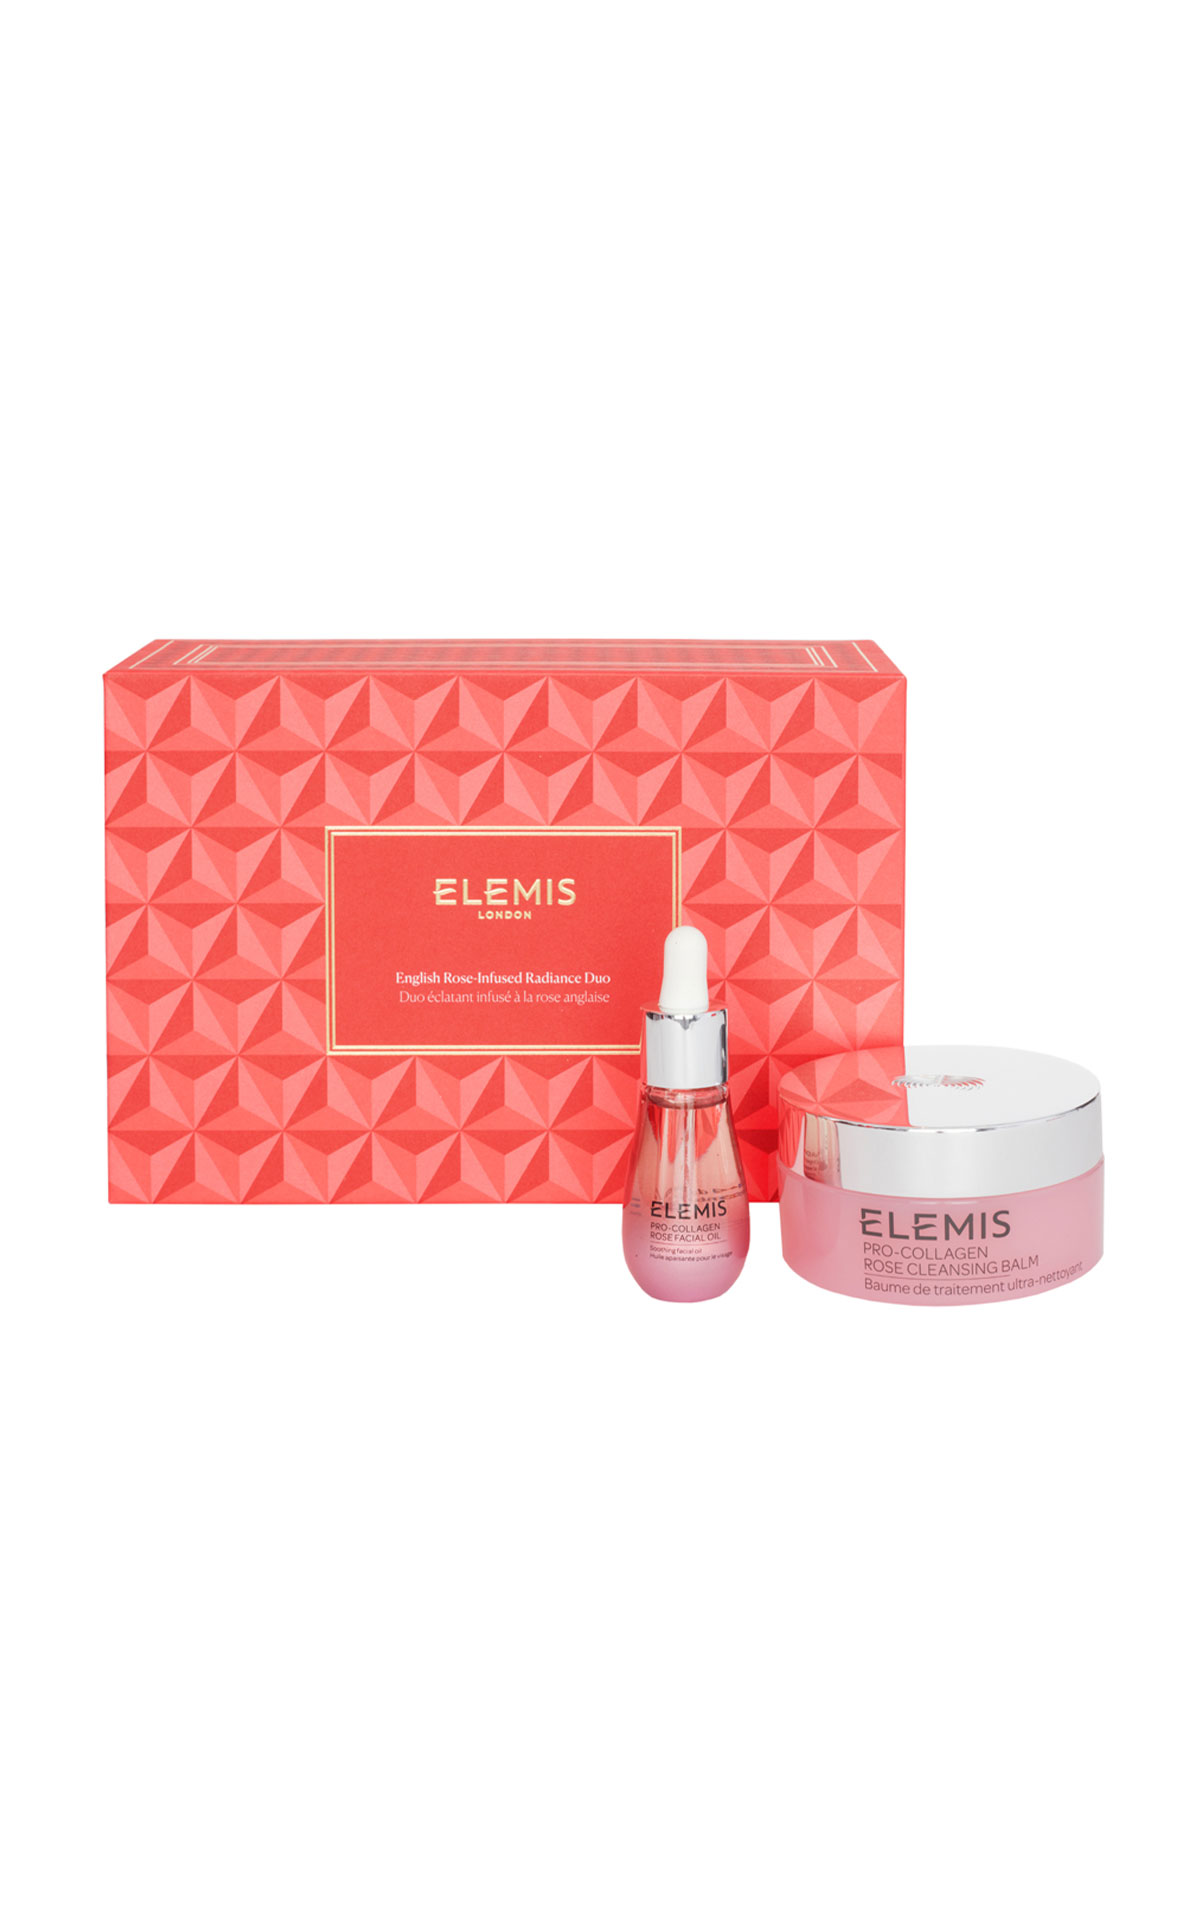 Elemis English rose-infused radiance duo set from Bicester Village